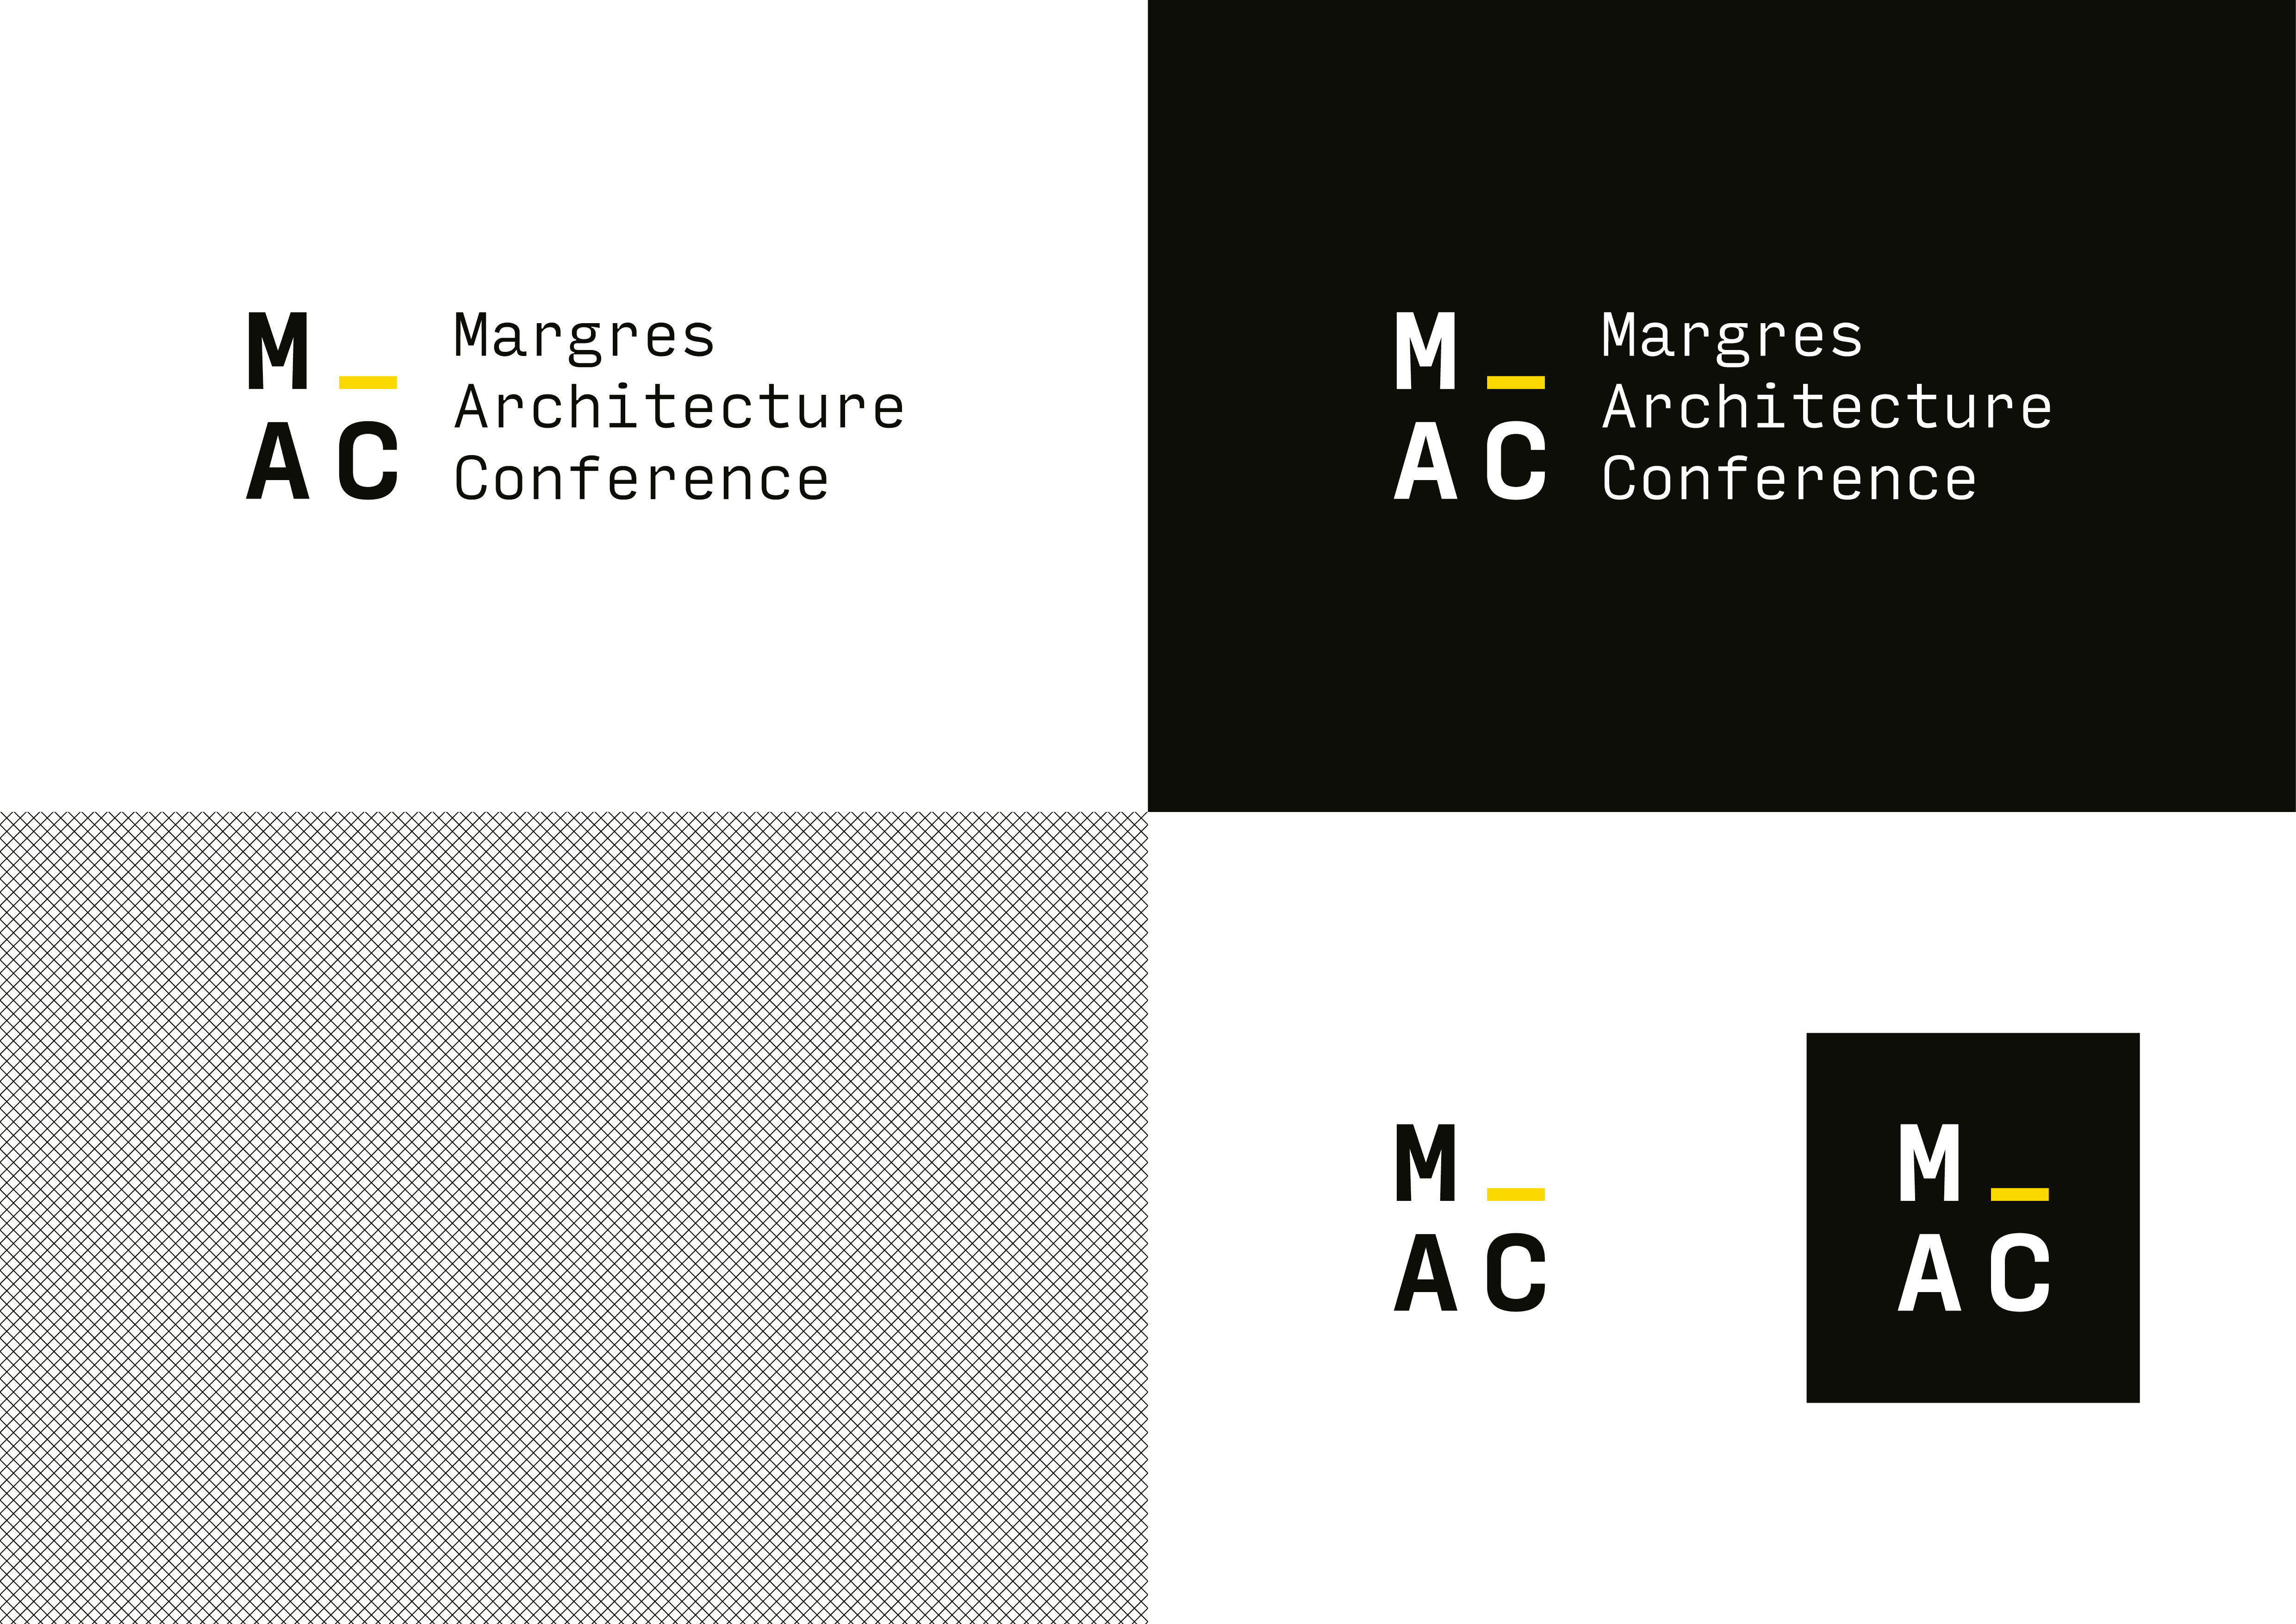 Margres Architecture Conference